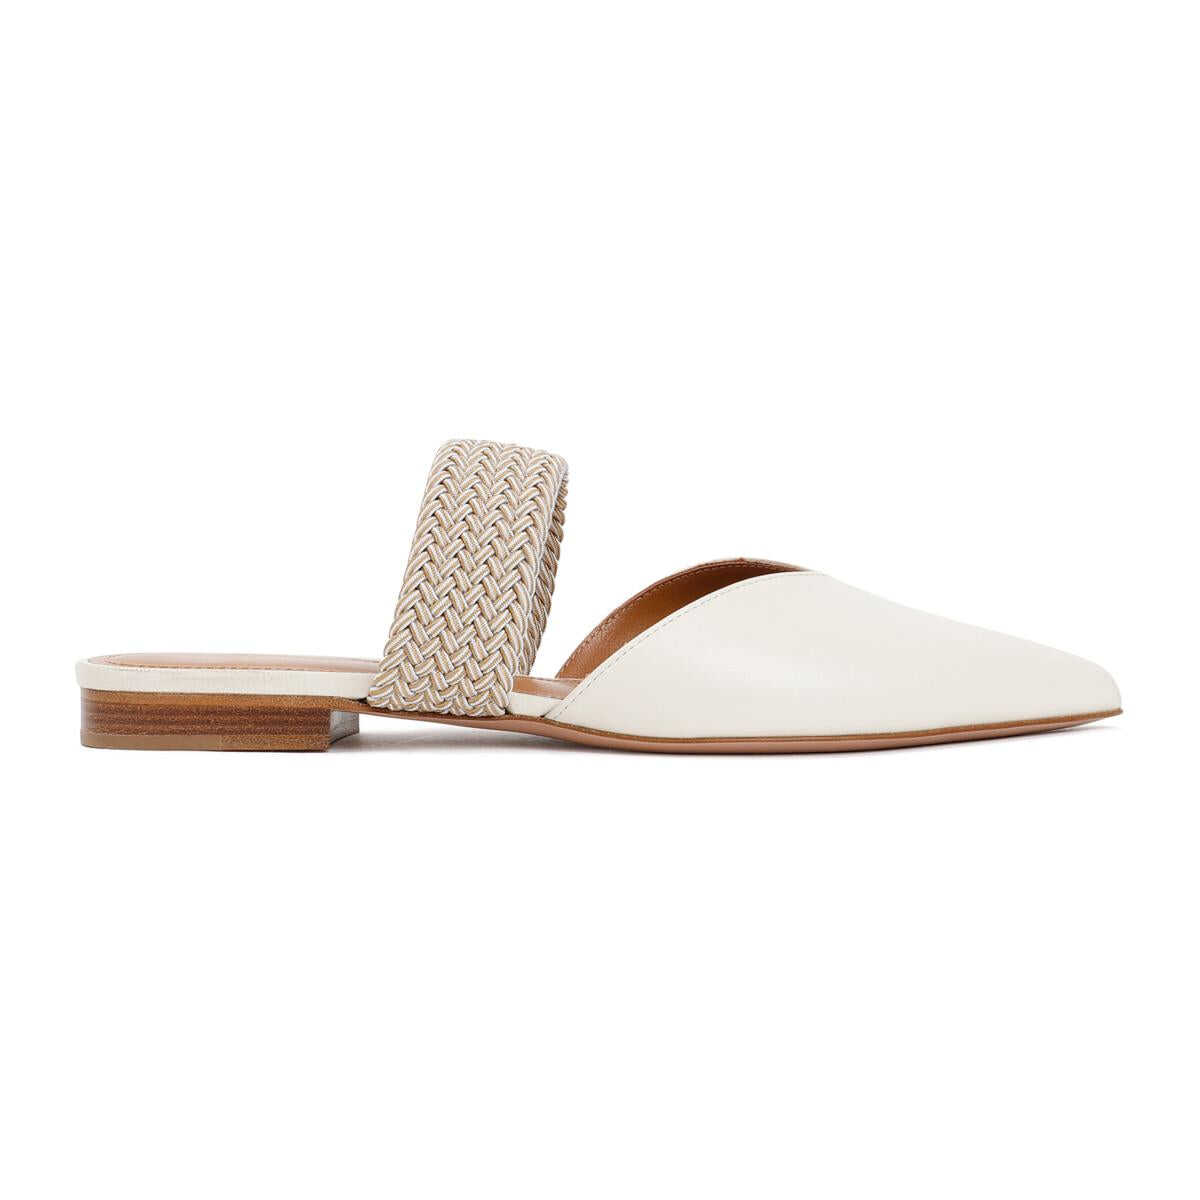 MALONE SOULIERS MALONE SOULIERS MAISIE MS FLAT SHOES NUDE & NEUTRALS